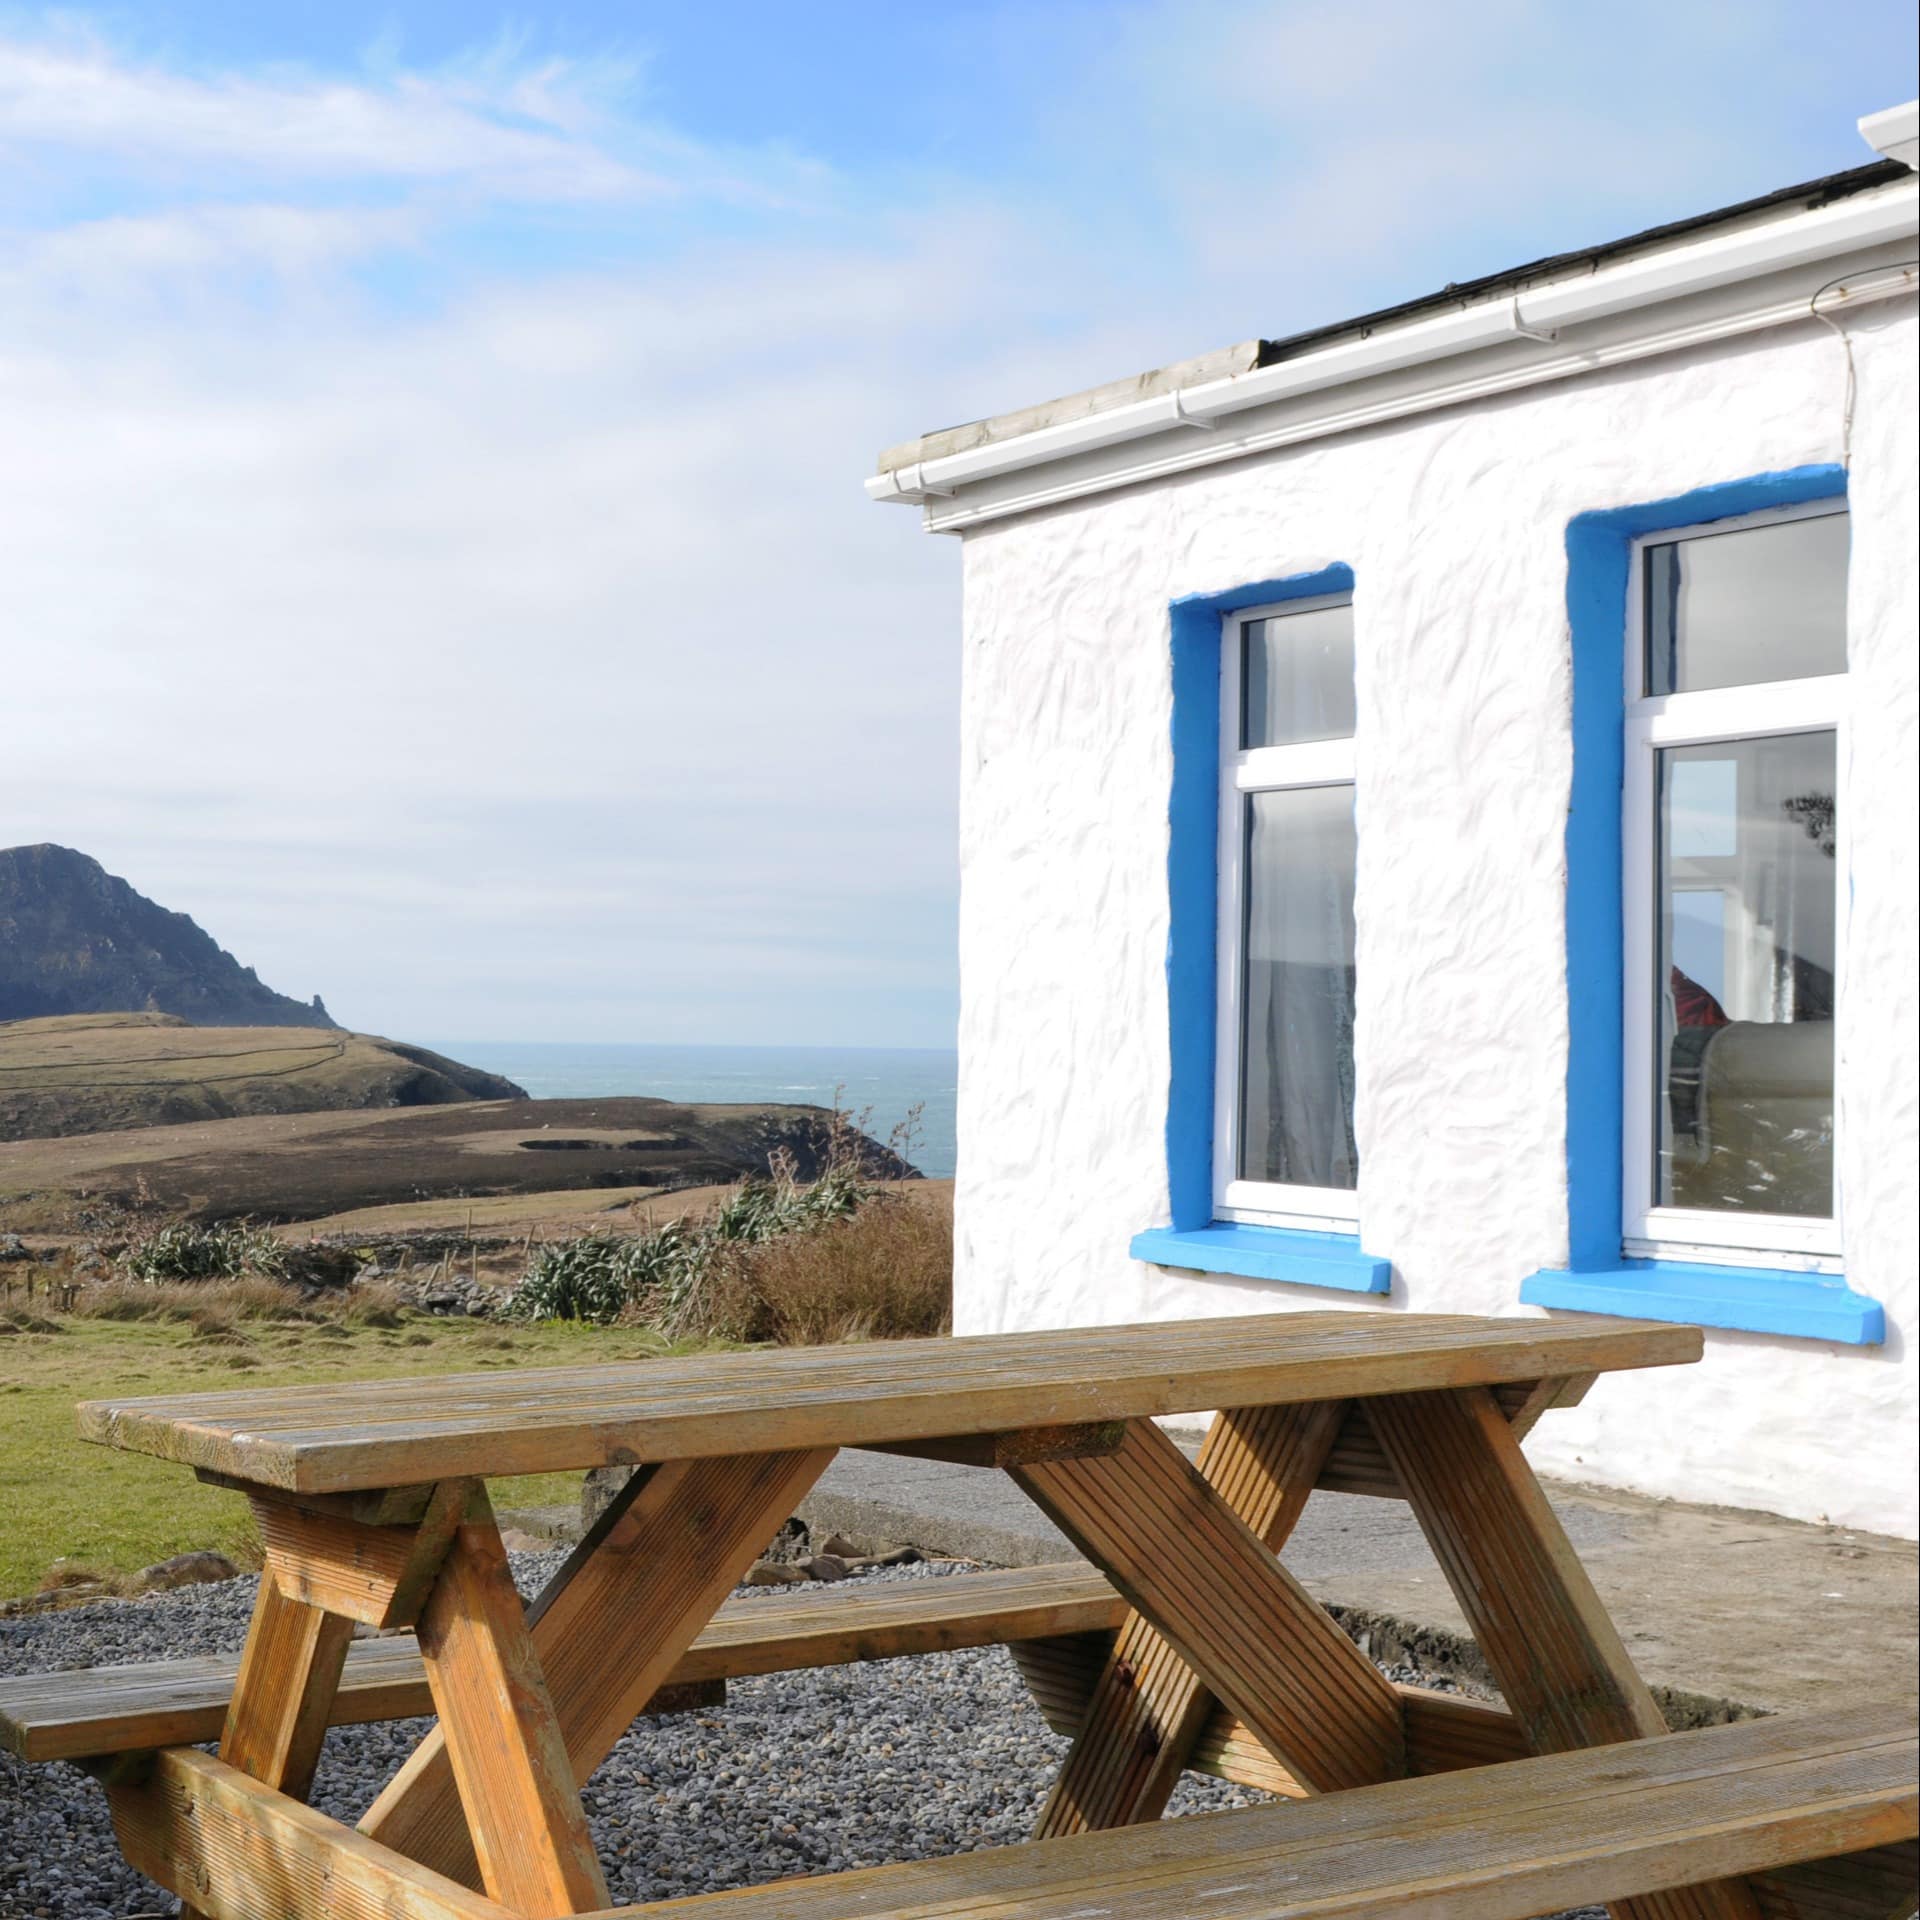 A charming cottage on the Dingle Peninsula with outdoor space and ocean views